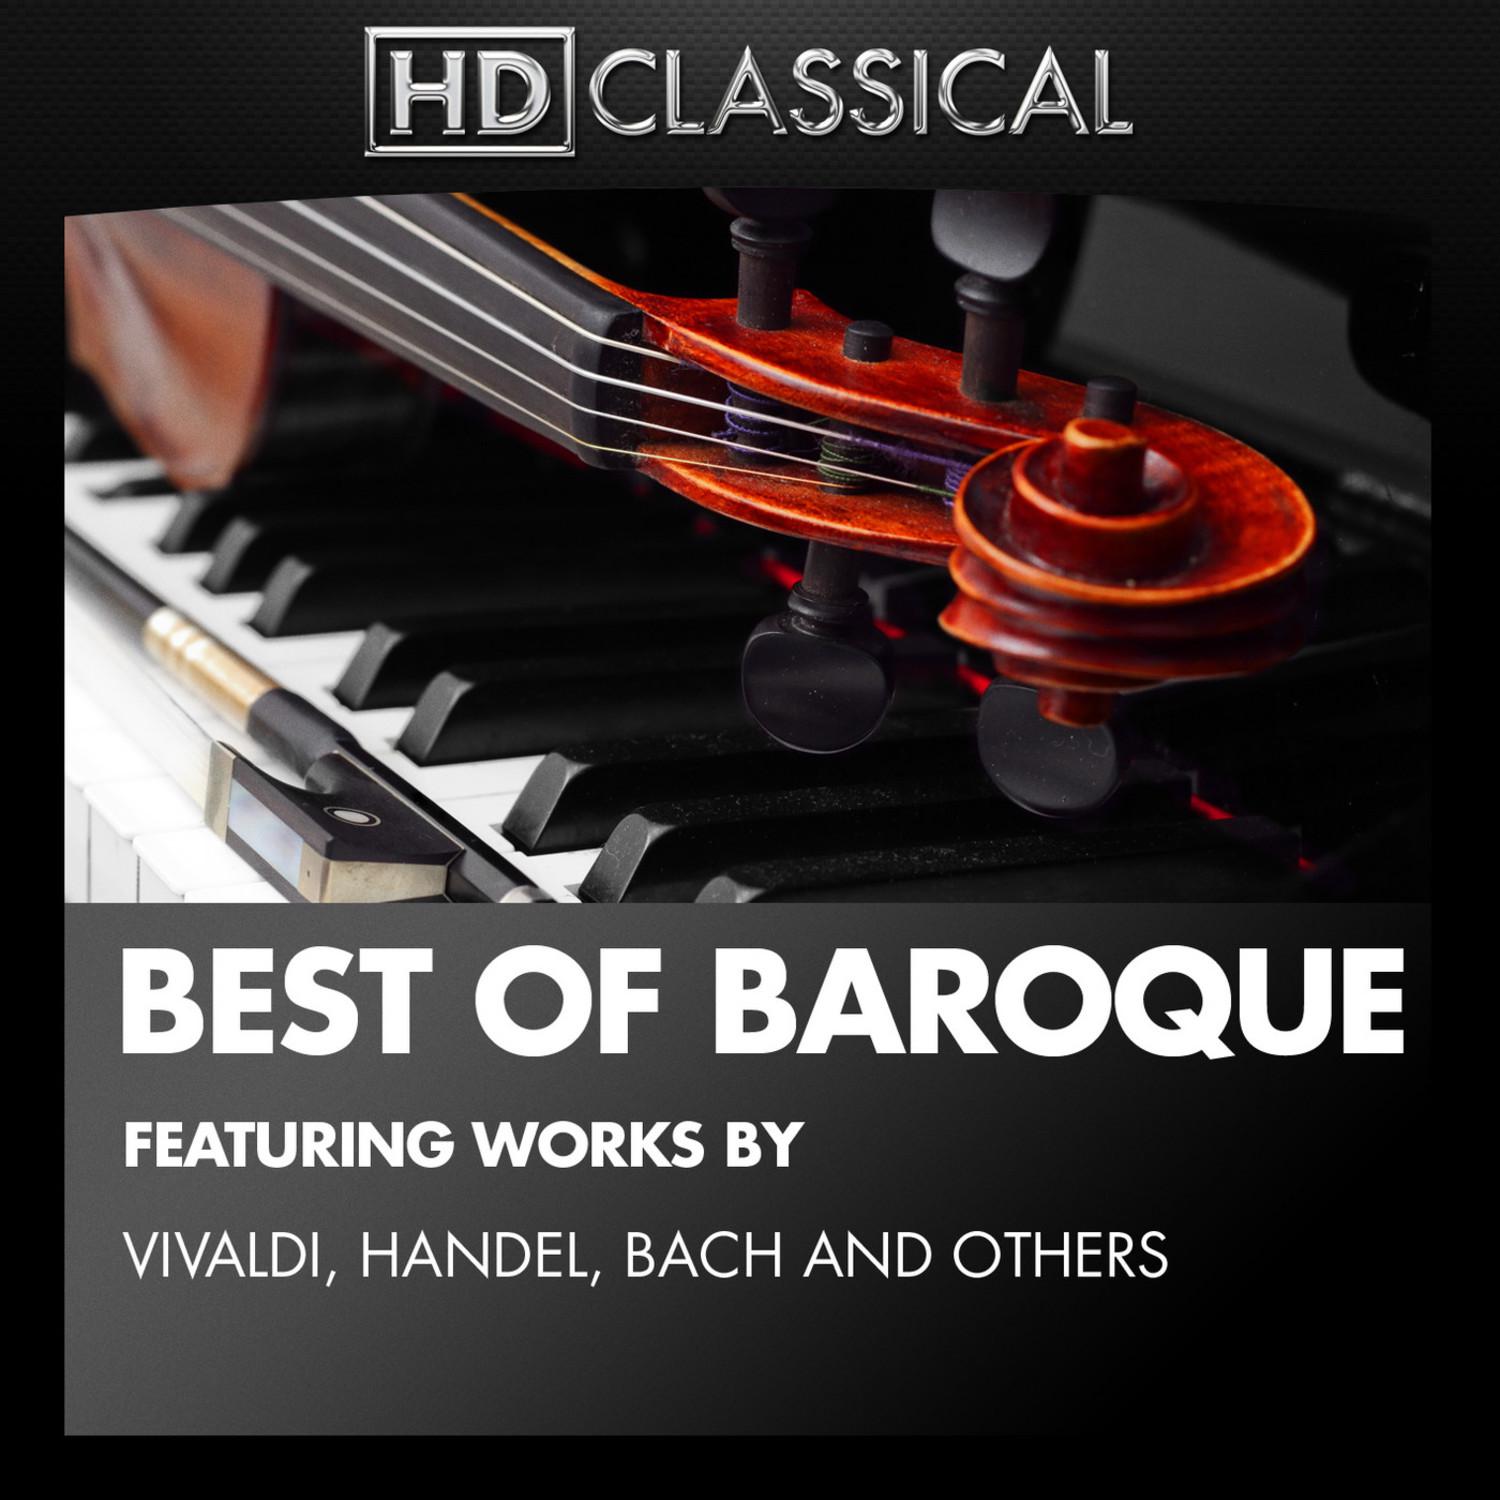 Concerto No. 5 in F Minor for Keyboard and Orchestra, BWV 1056: I. Allegro